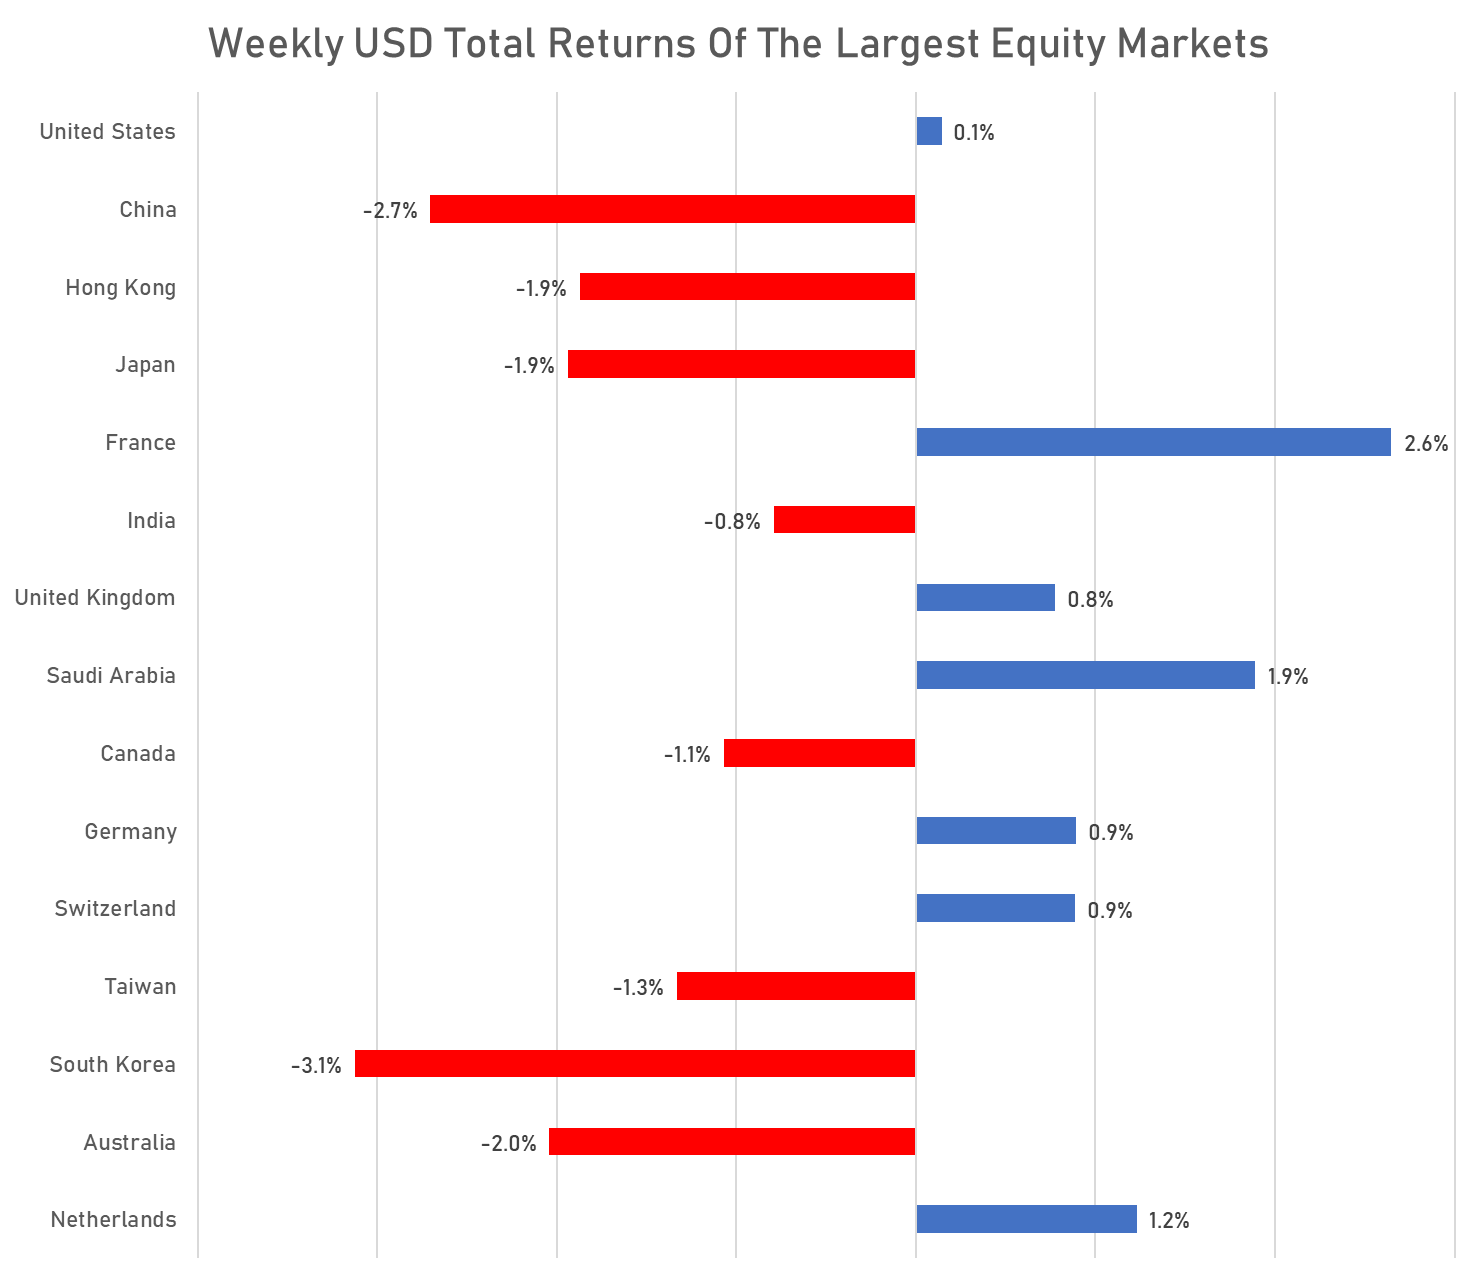 Weekly USD Total Returns of major equity markets | Sources: phipost.com, FactSet data